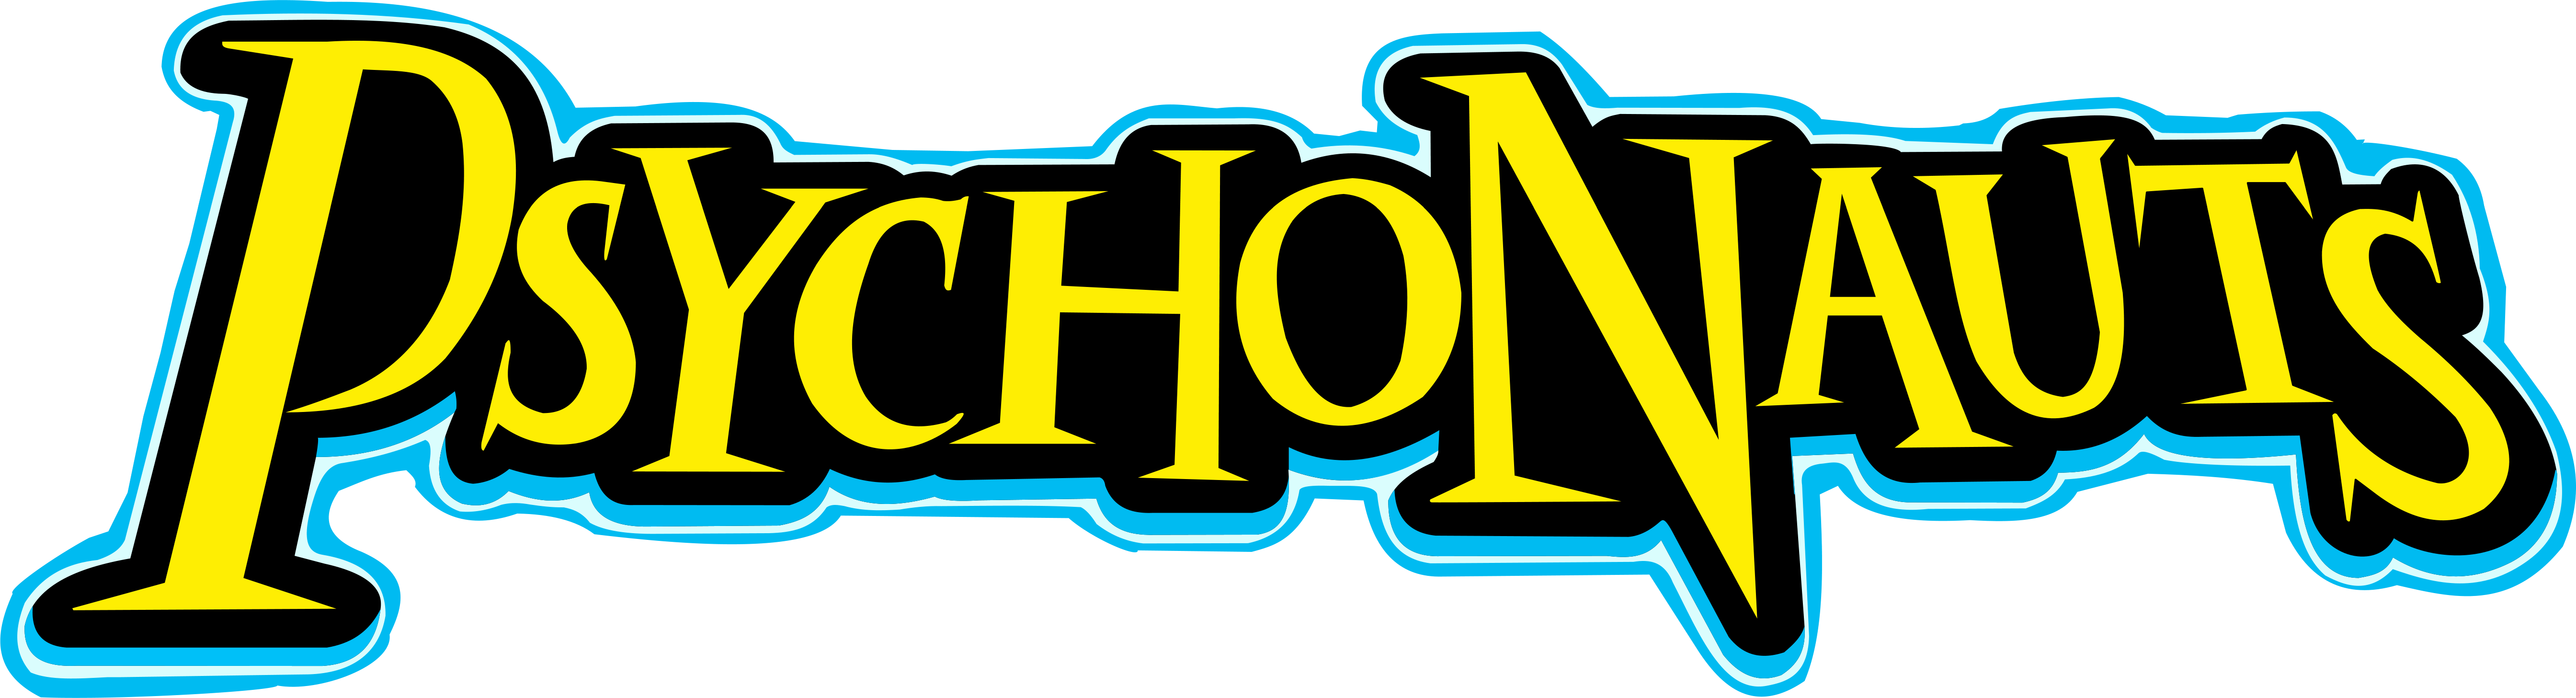 a logo of the game psychonauts 2005